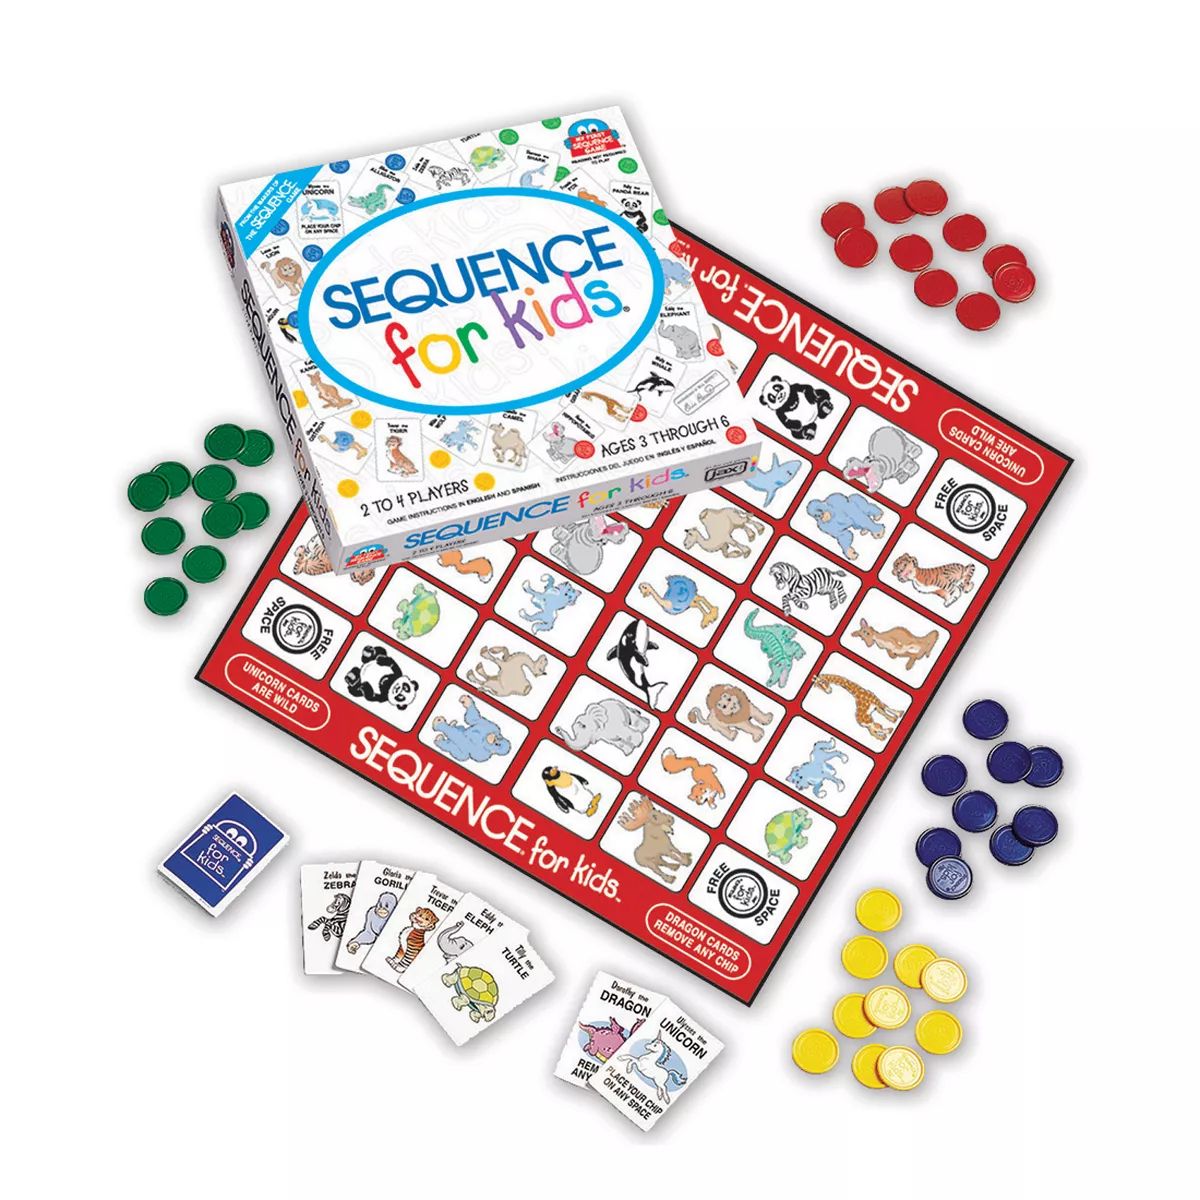 Sequence for Kids Game | Target